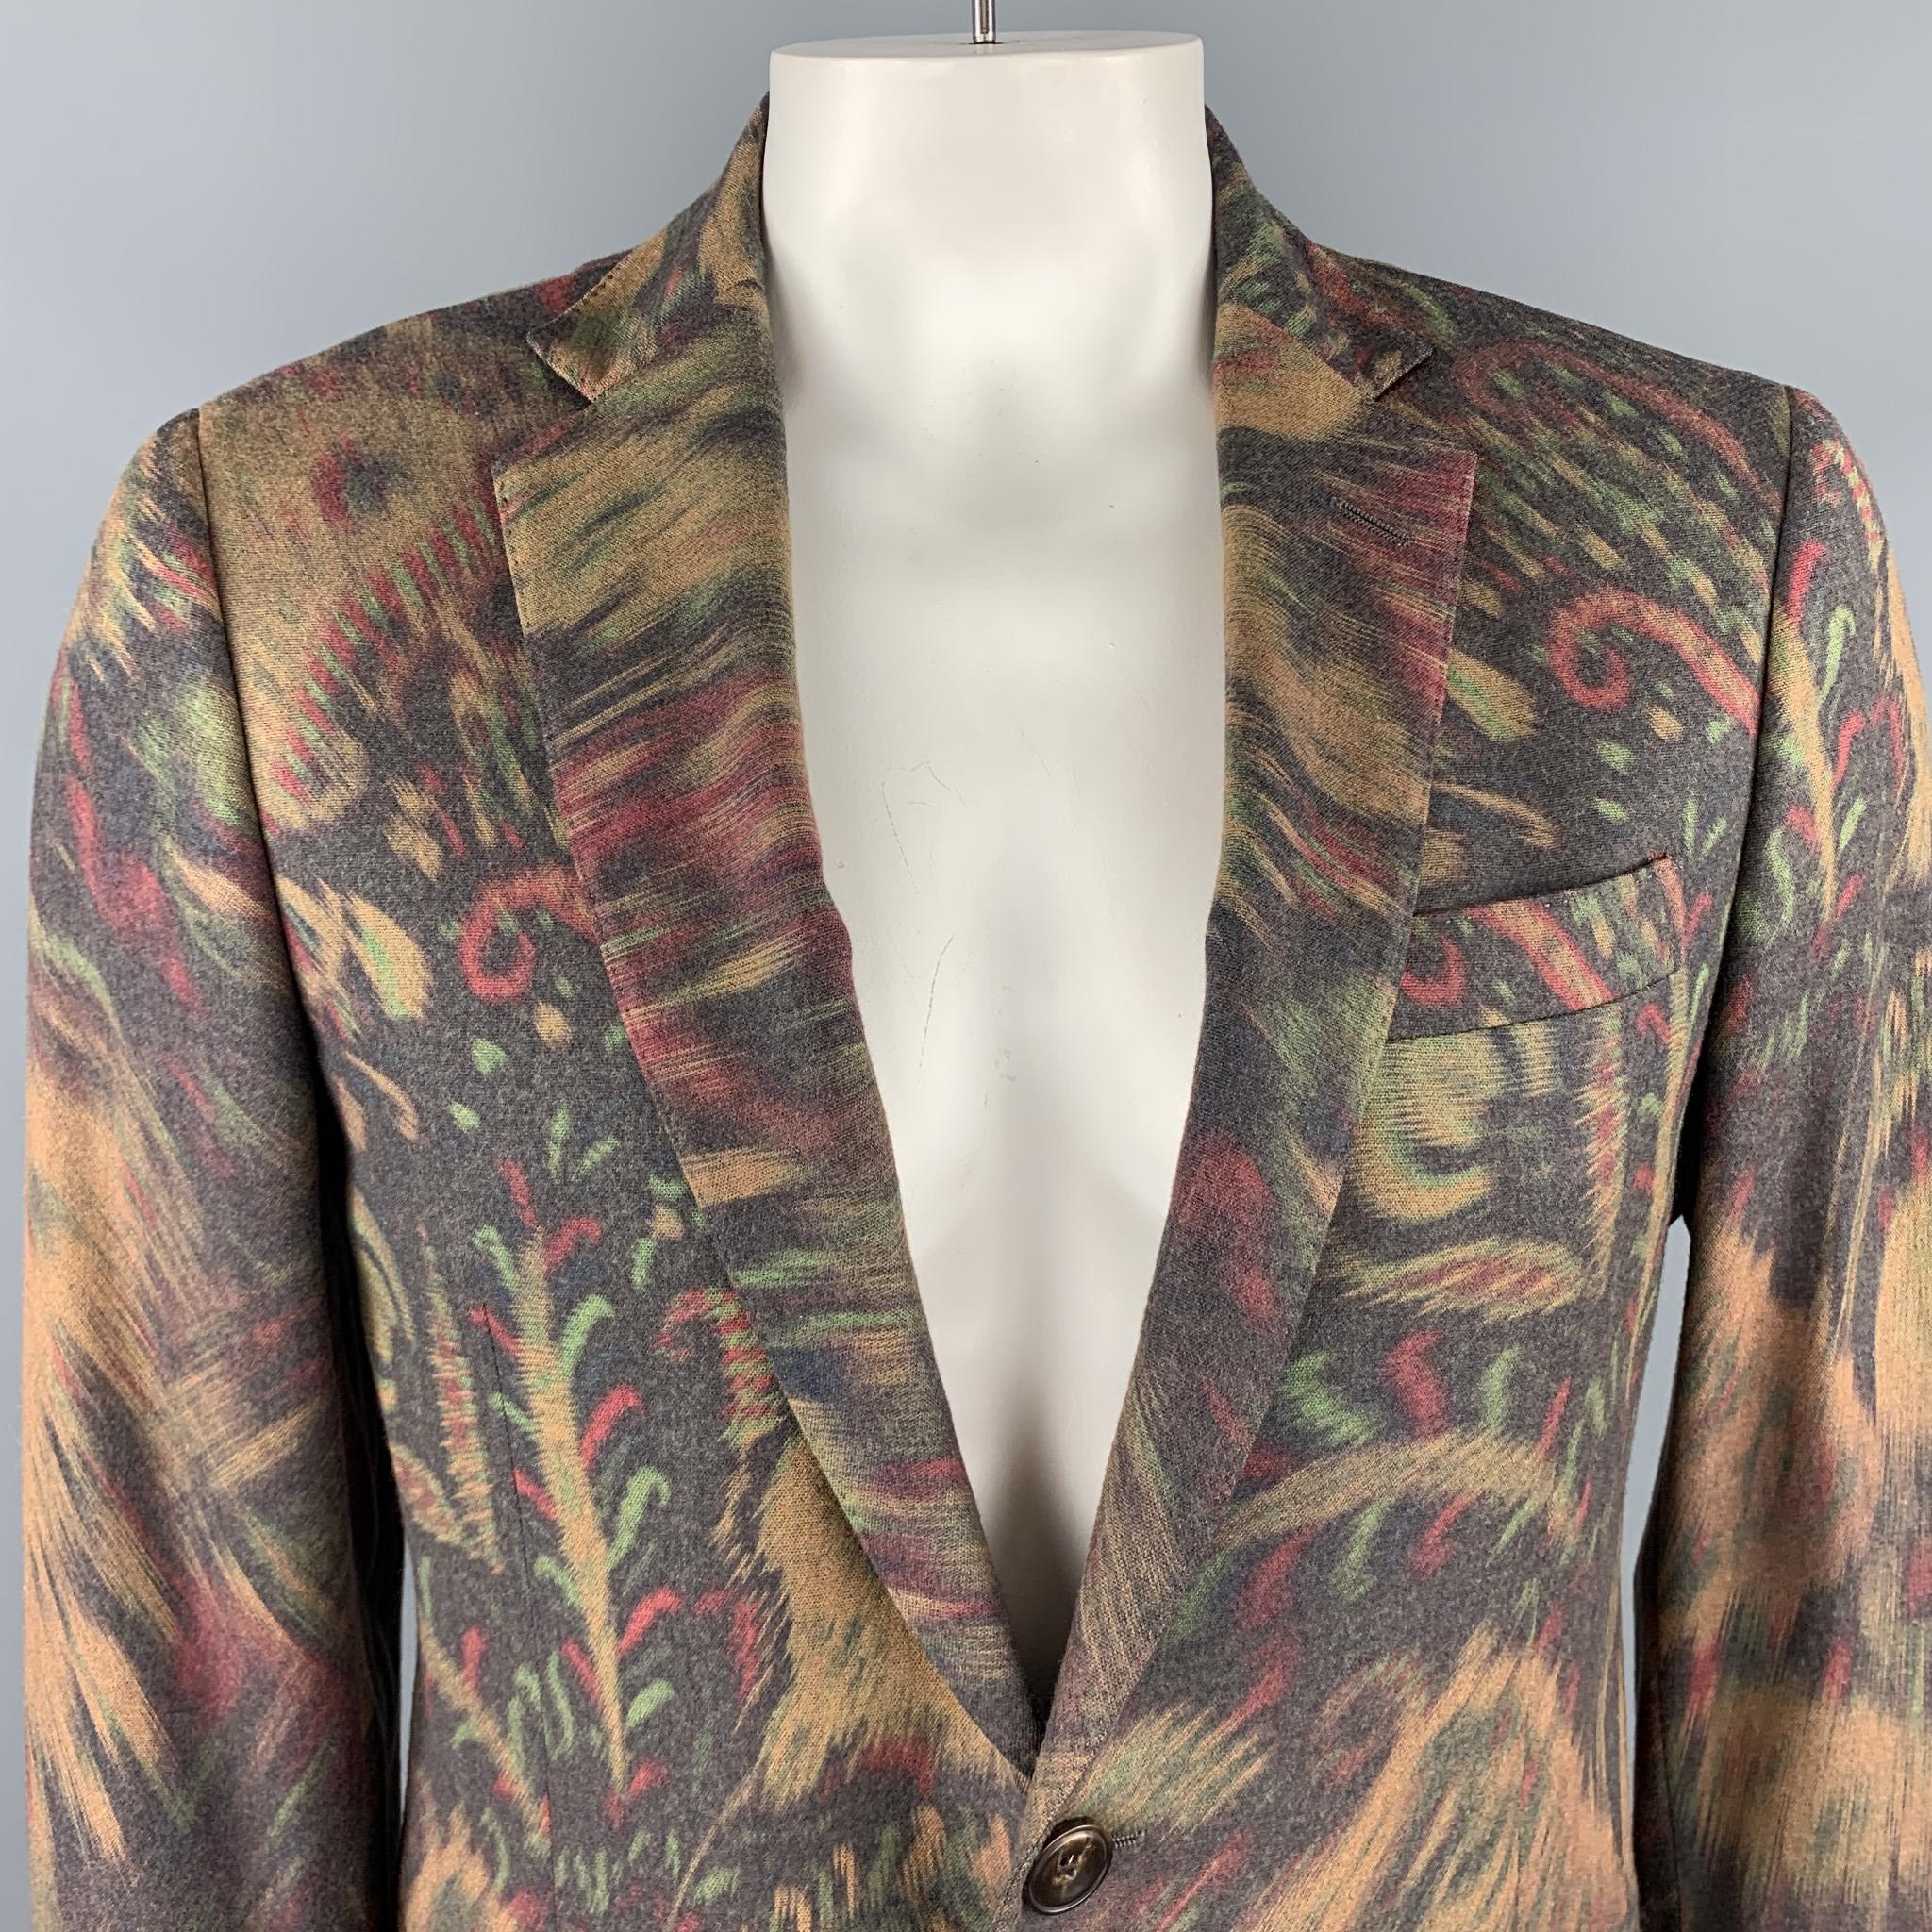 ETRO sport coat comes in an abstract beige and multi color abstract paisley print wool blend with a notch lapel, single breasted, two button front, and printed silk liner. Made in Italy.

Excellent Pre-Owned Condition.
Marked: IT